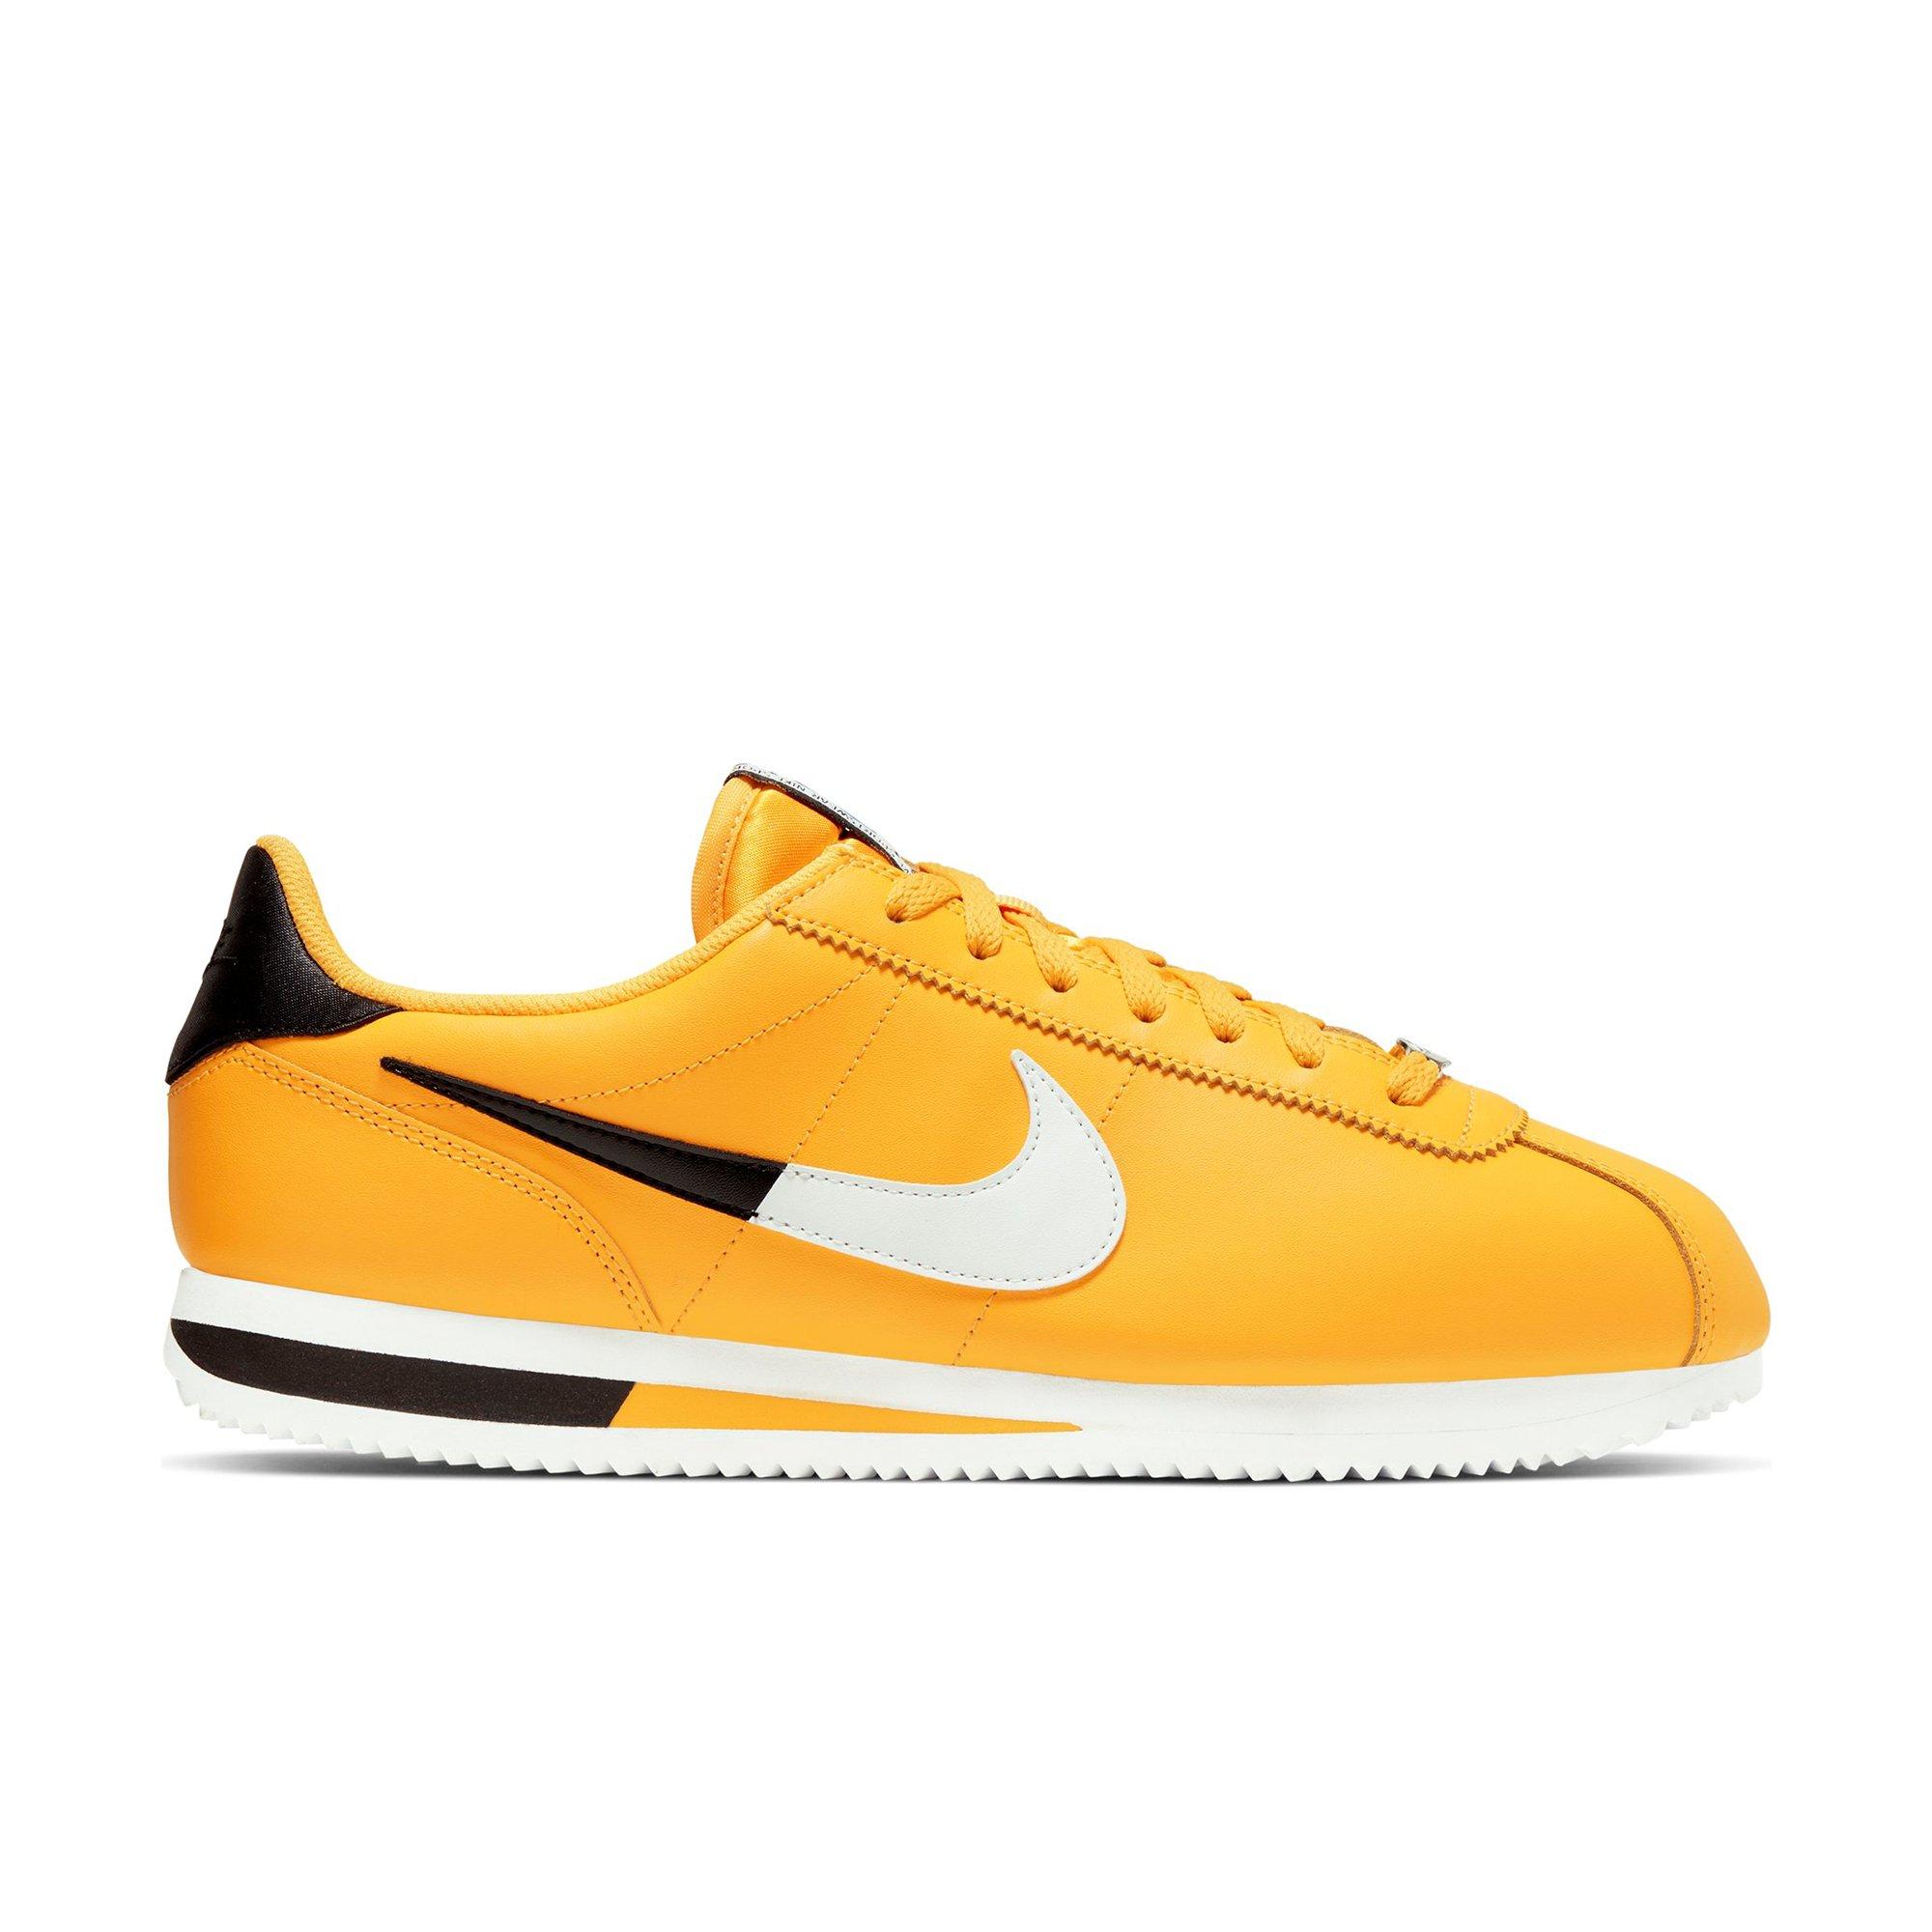 yellow and black nike running shoes